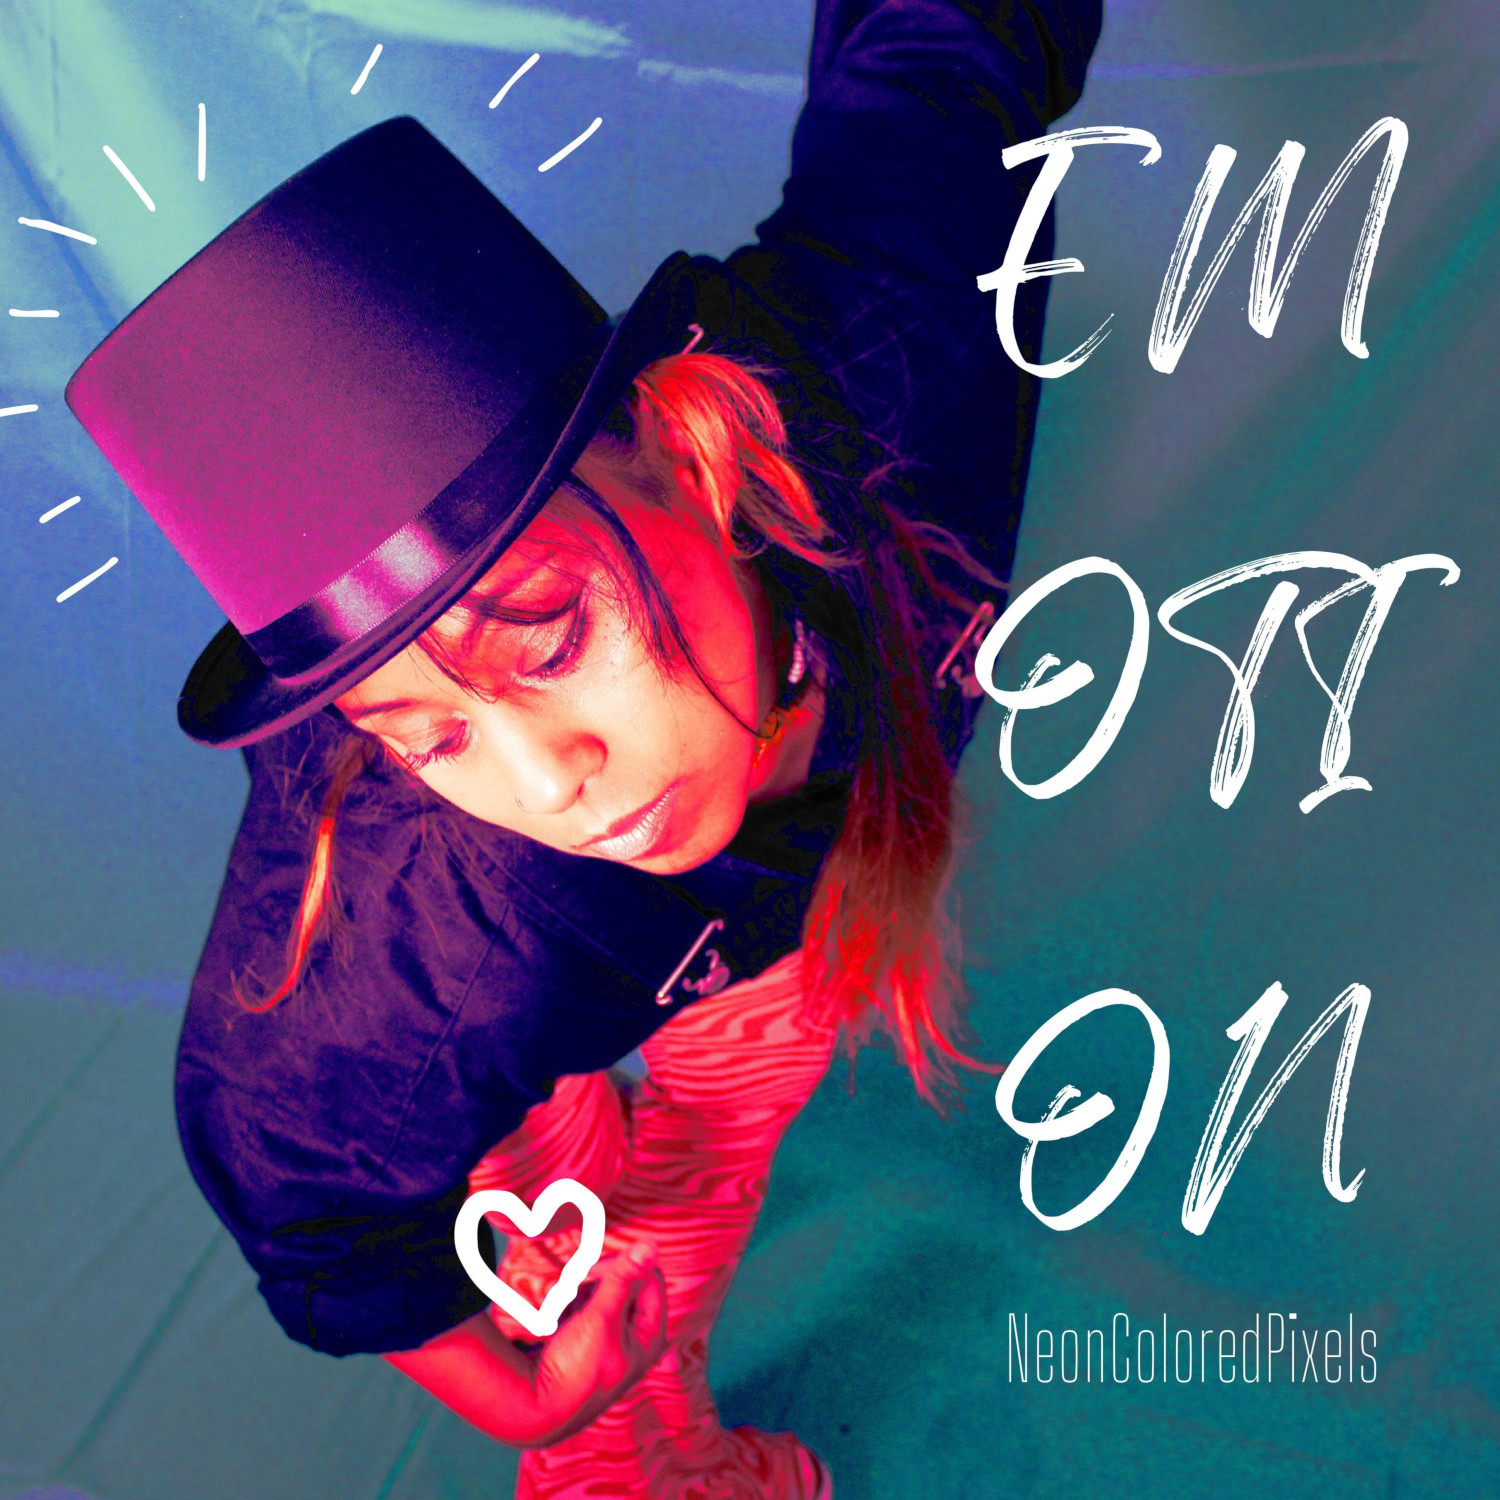 Emotion (It's in the moment) by NEONCOLOREDPIXELS single cover art